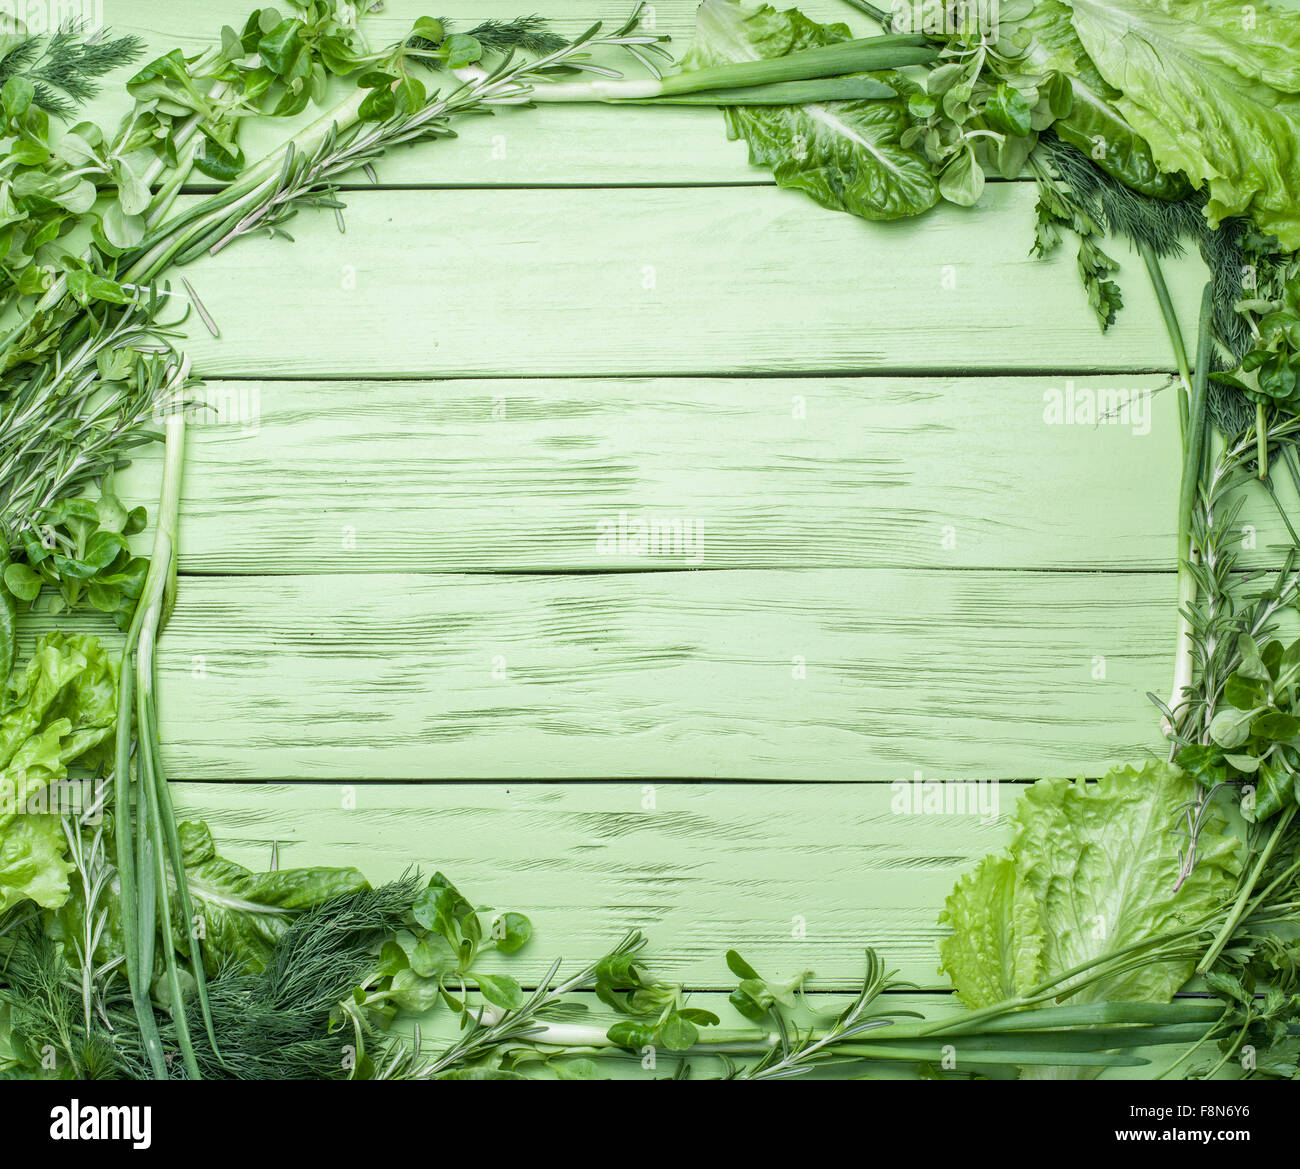 Green herbs on the green wooden background Stock Photo - Alamy